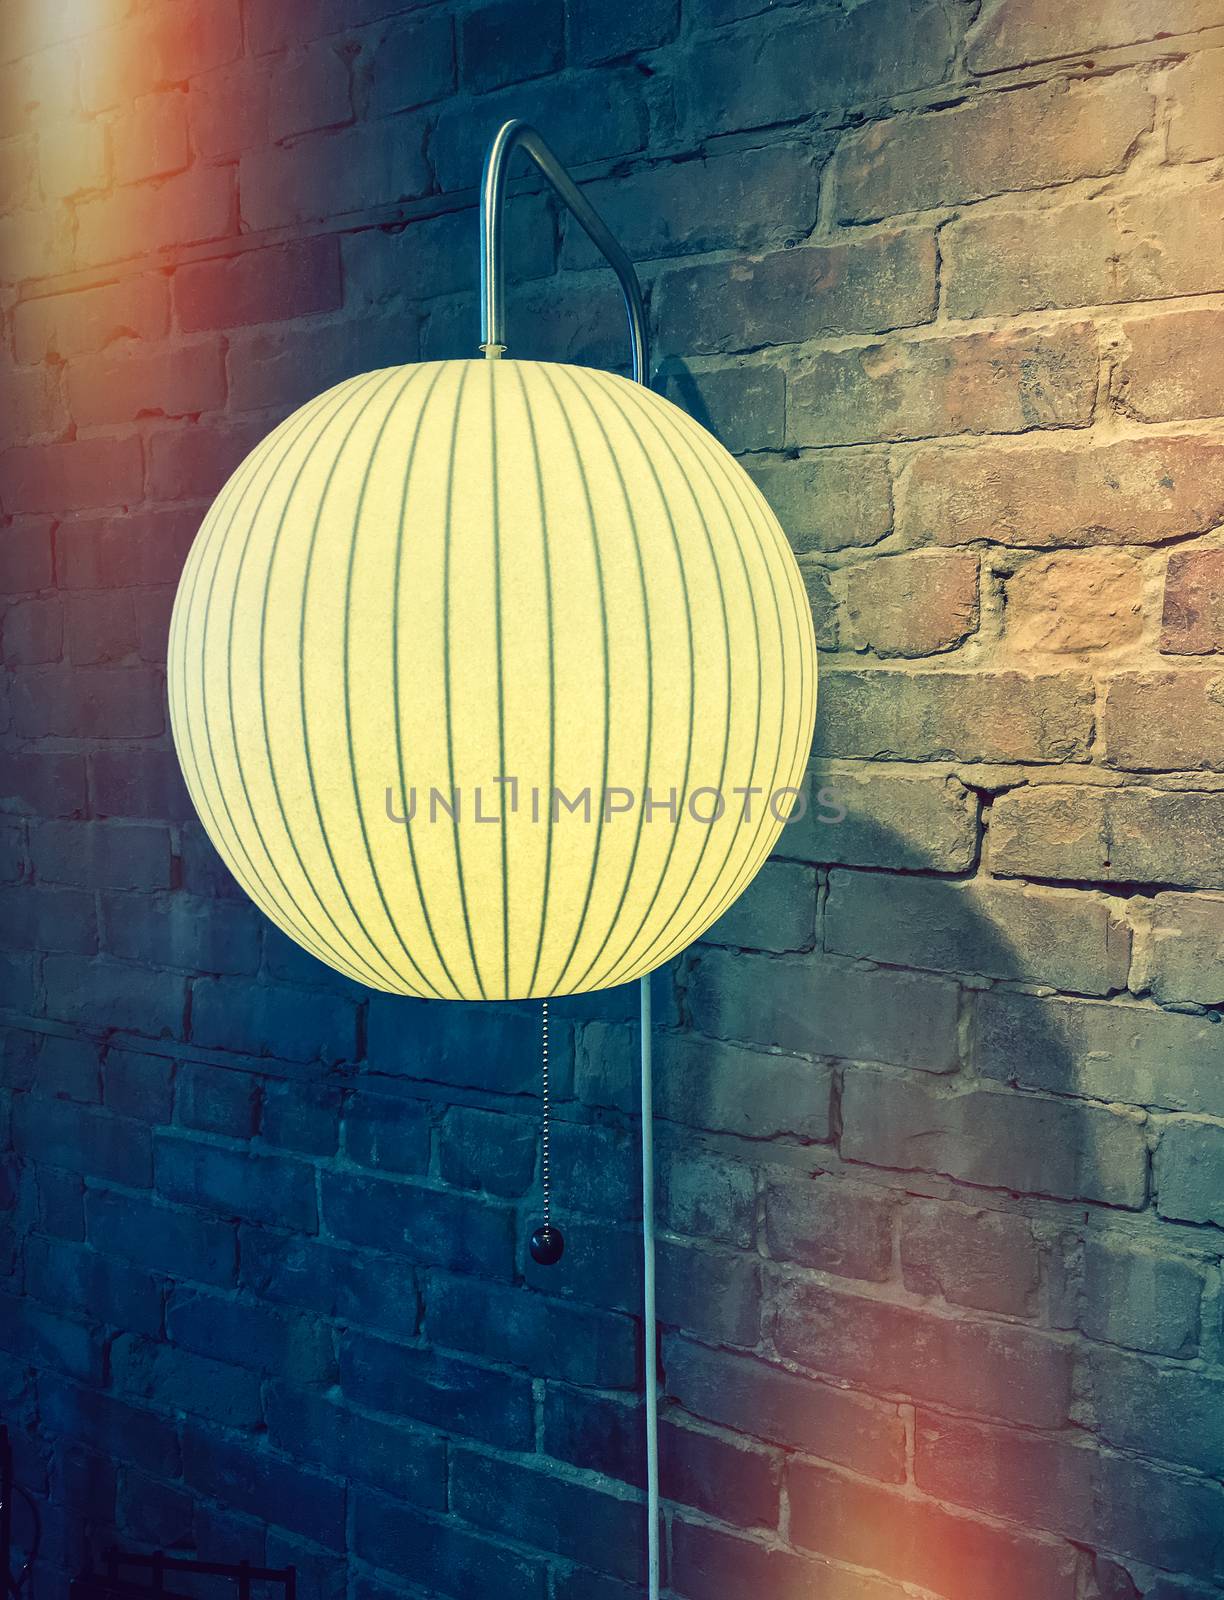 Retro style image of a wall lamp with round lampshade by anikasalsera